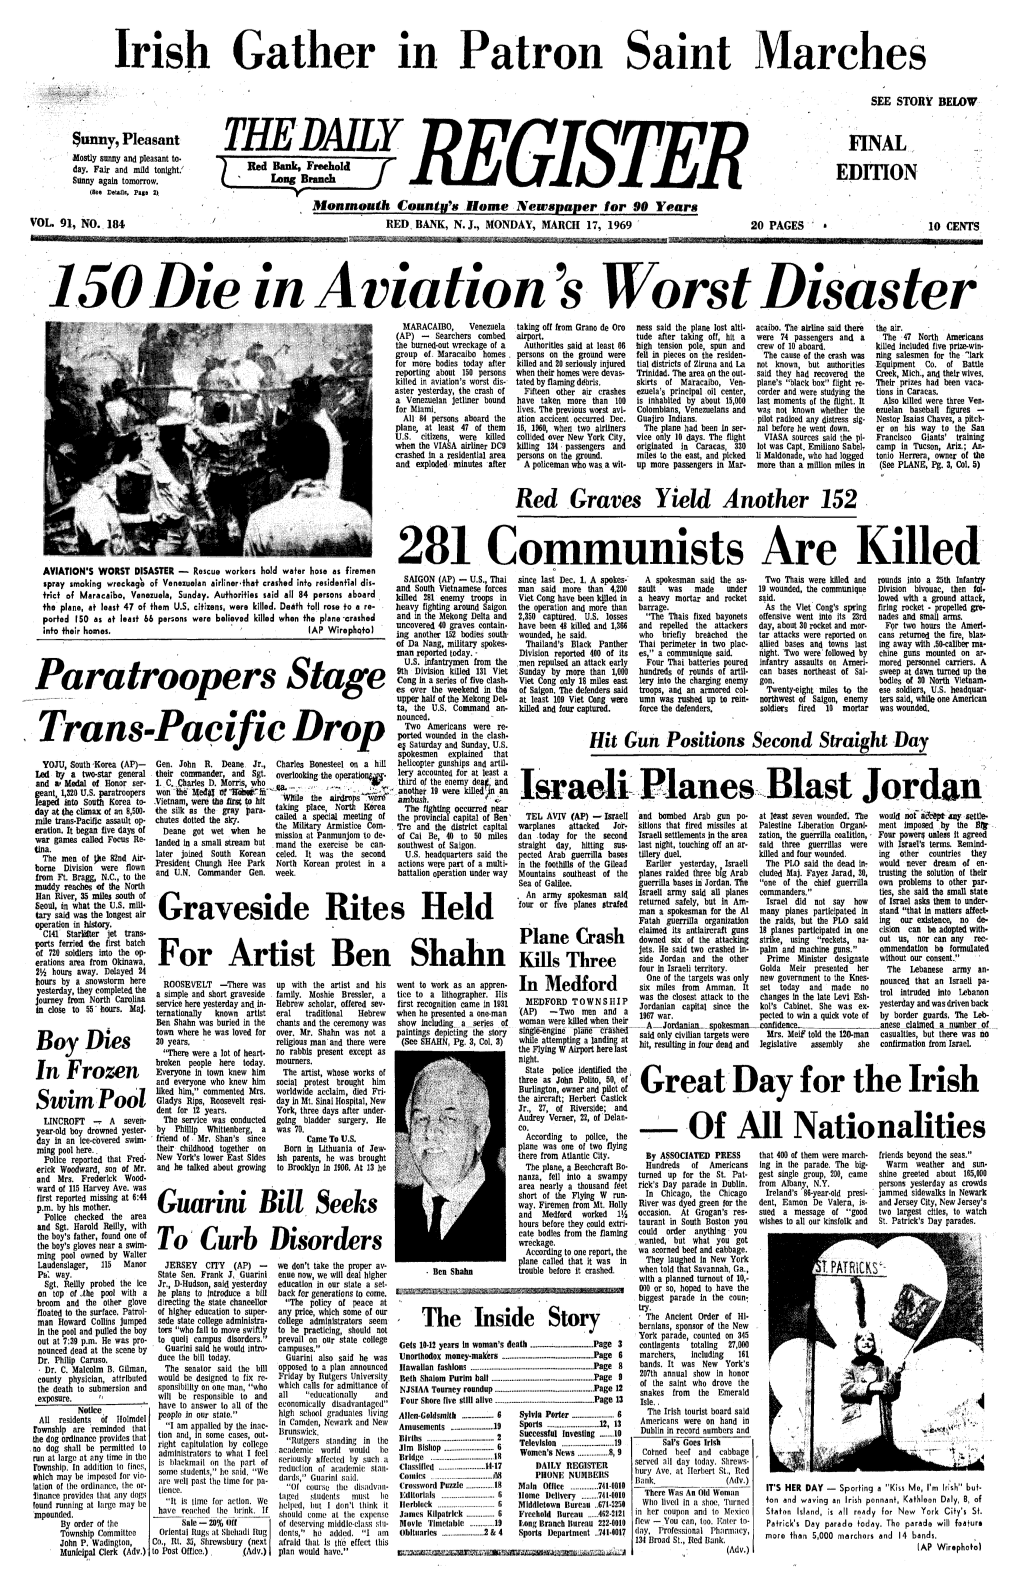 17, 1969 20 PAGES • 10 CENTS 150 Die in Aviation's Worst Disaster MAEACAIBO, Venezuela Taking Off from Grano De Oro Ness Said the Plane Lost Alti- Acaibo